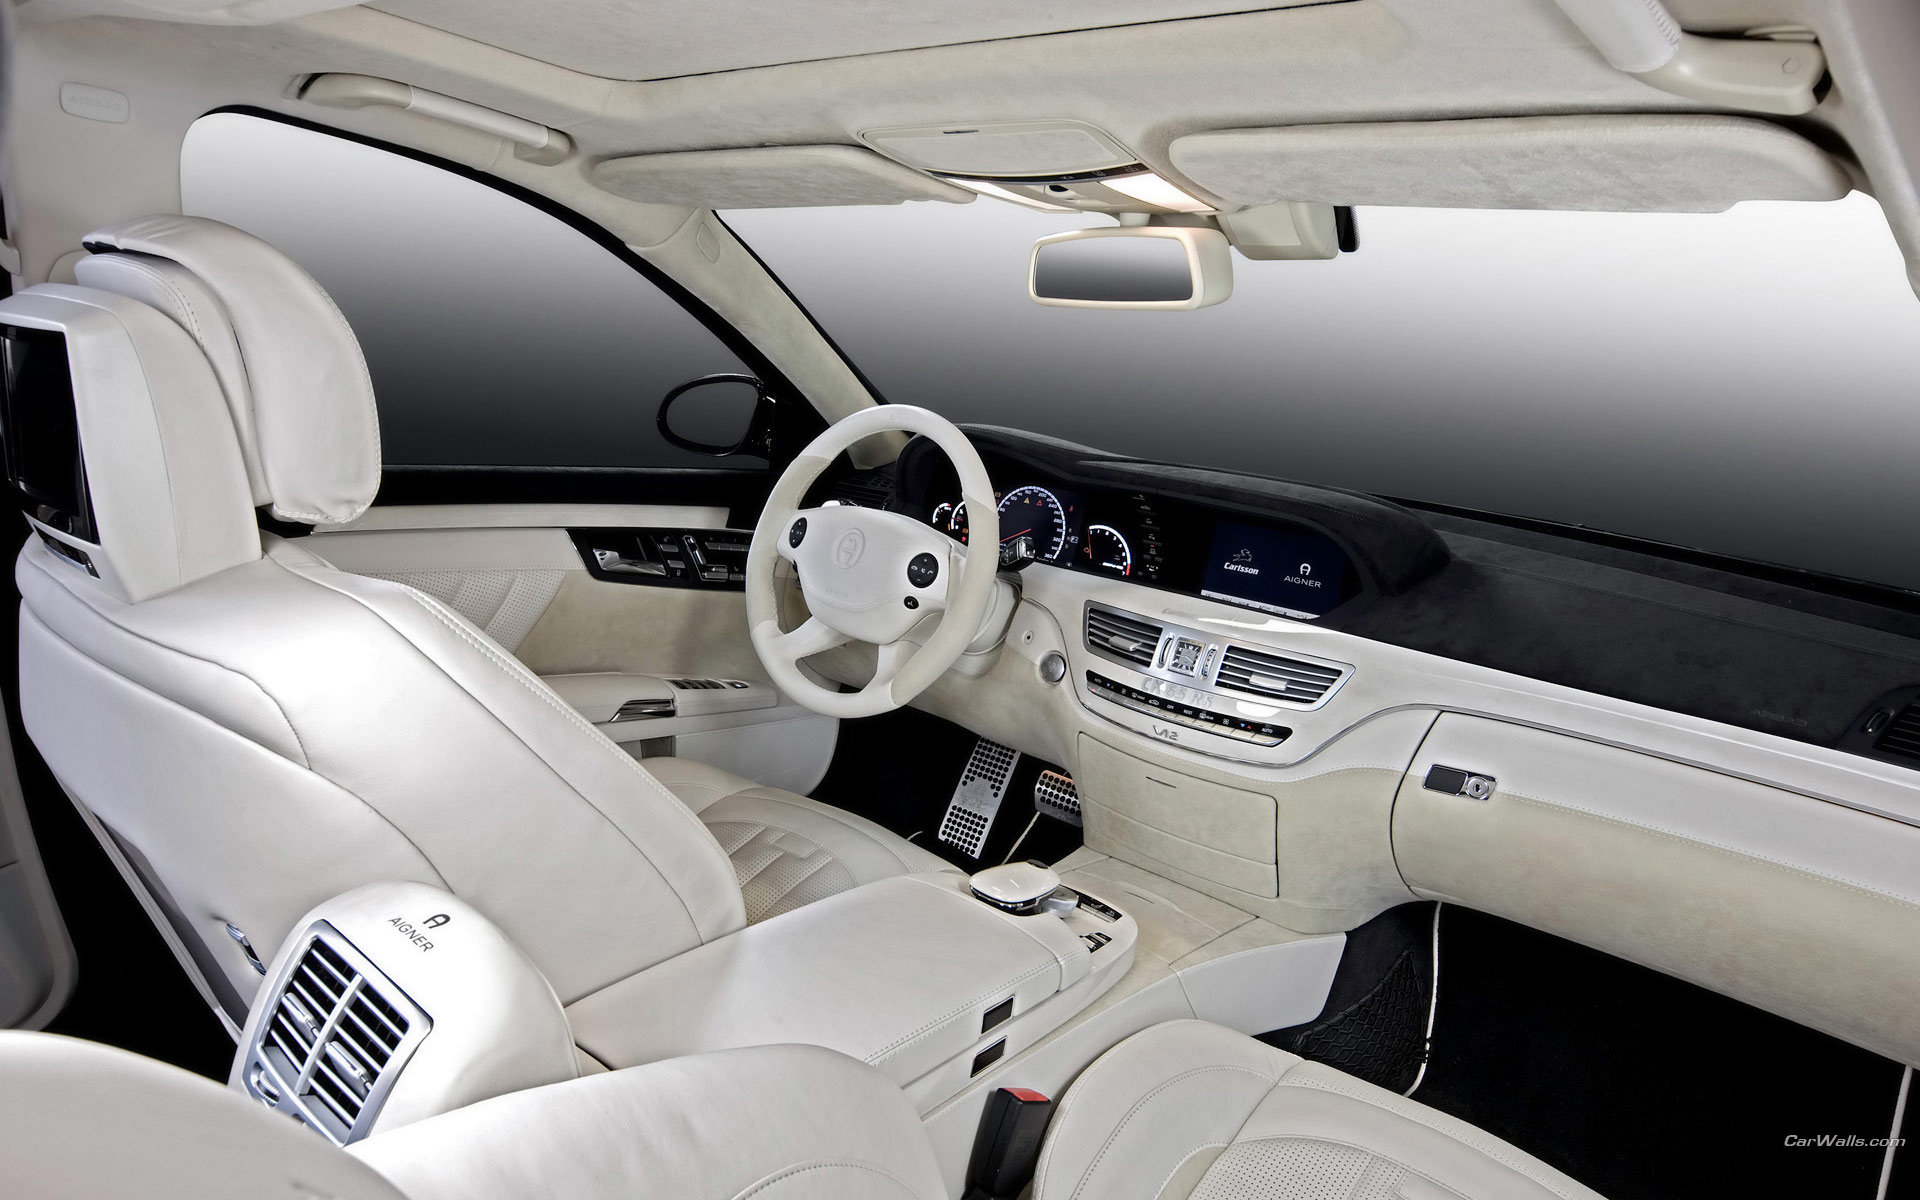 Wallpapers car interior white on the desktop